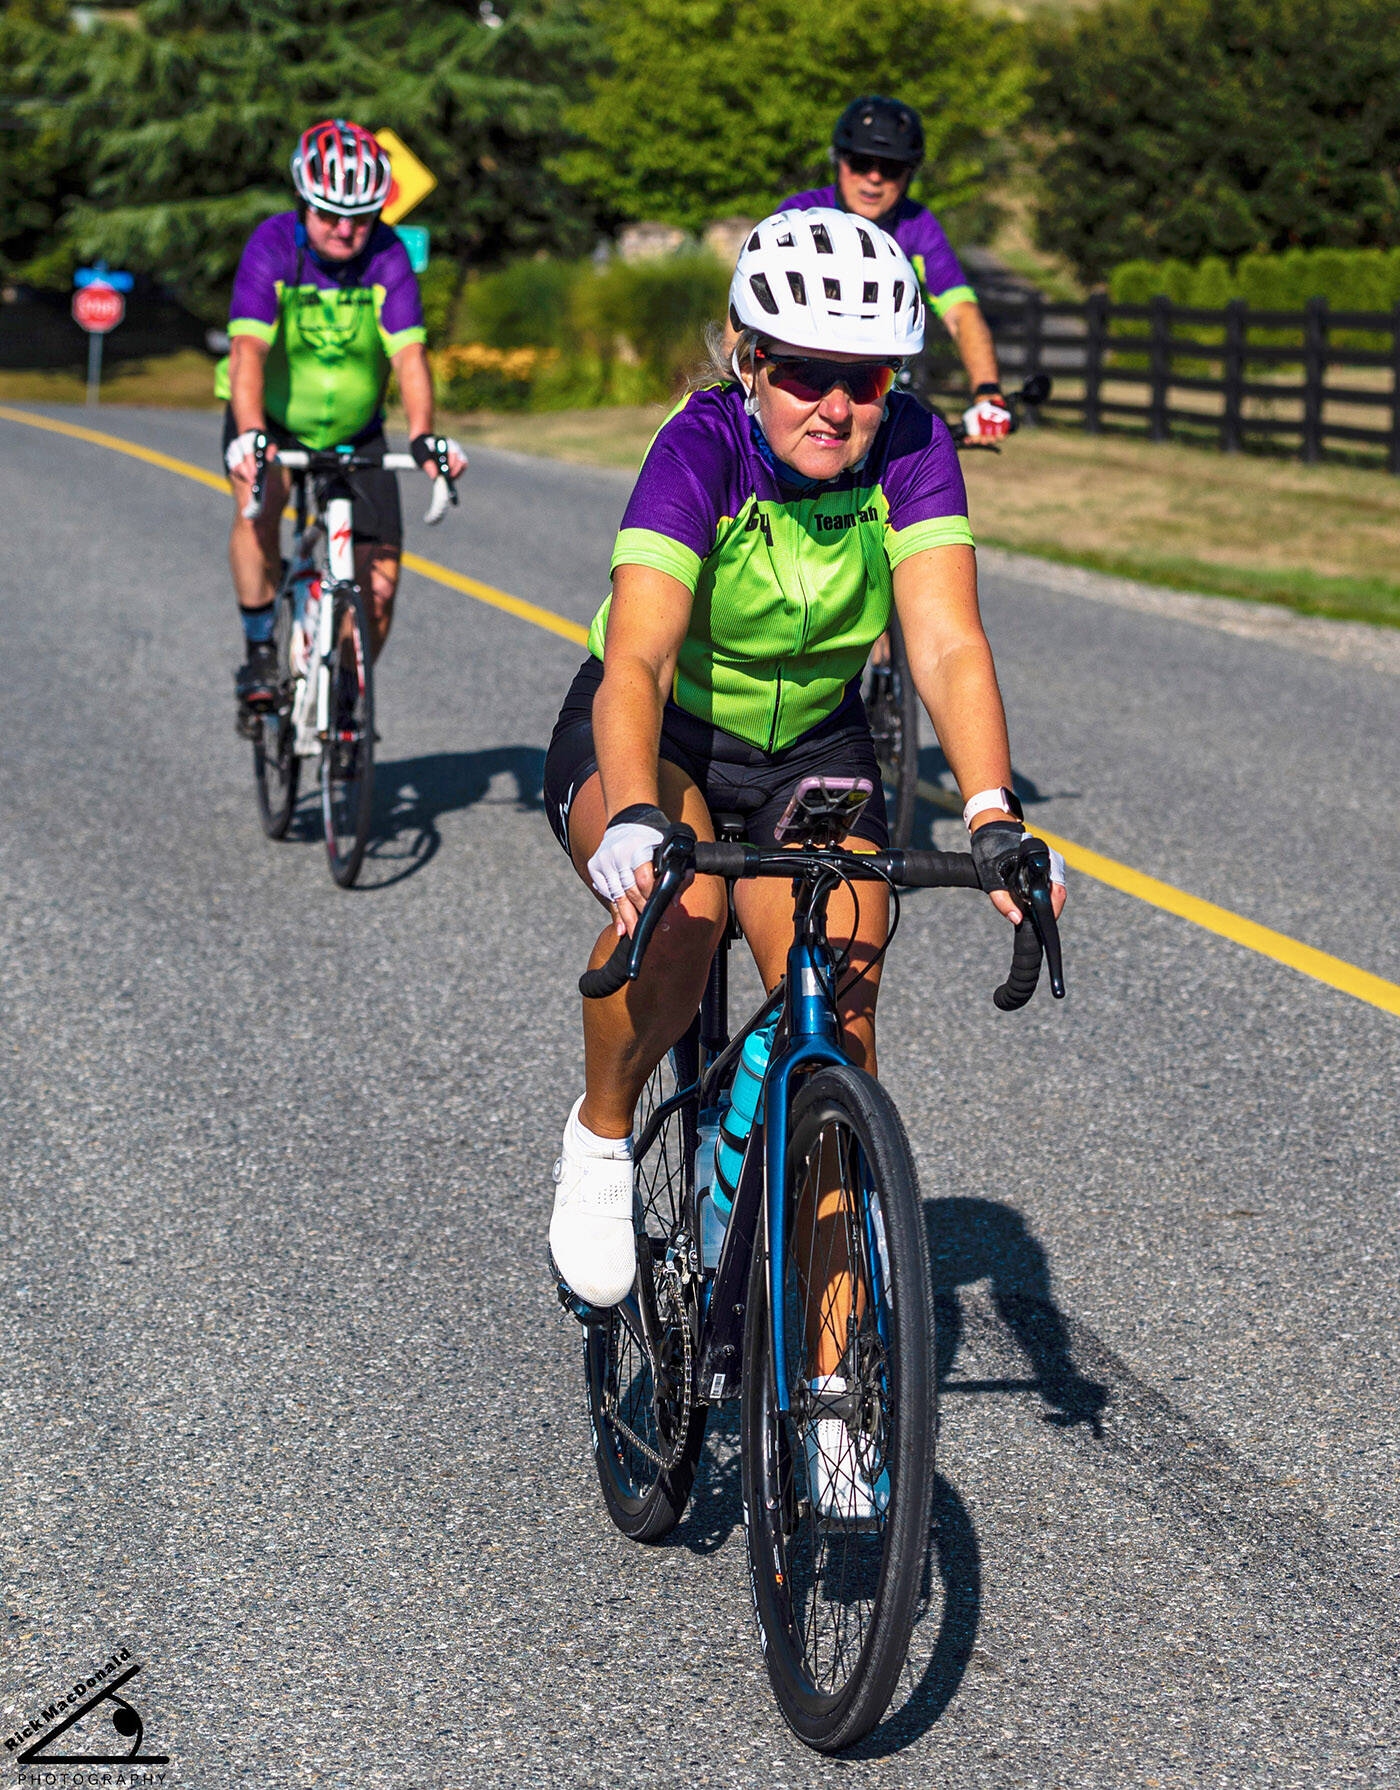 Janet Janzen of Chilliwack rides the 100-kilometre route in the Tour de Cure fundraiser for BC Cancer Foundation on Aug. 28, 2021. (Rick MacDonald Photography)